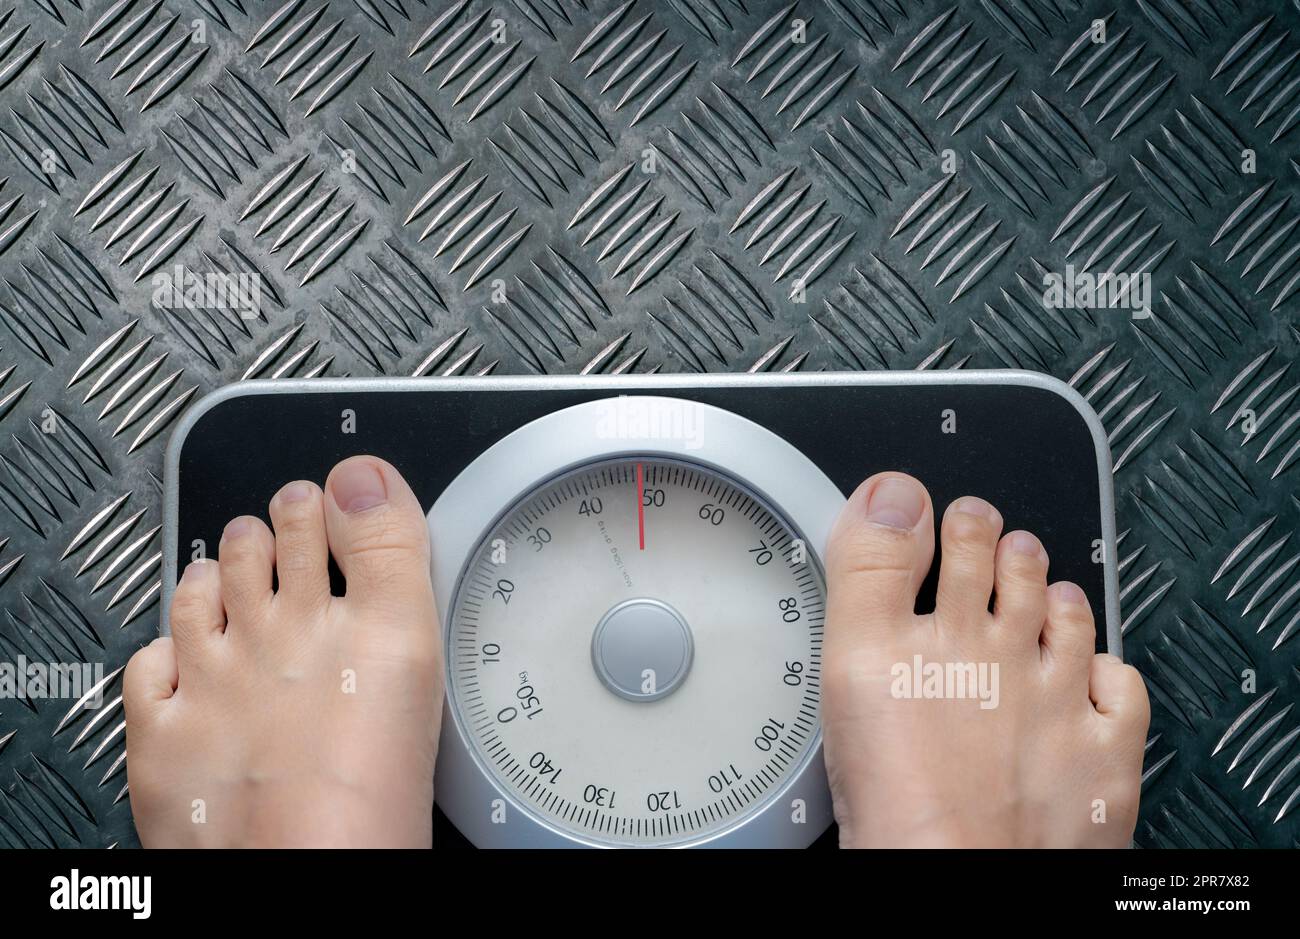 https://c8.alamy.com/comp/2PR7X82/top-view-of-feet-on-weighing-scale-women-weigh-on-a-weight-balance-scale-after-diet-control-healthy-body-weight-weight-and-fat-loss-concept-weight-measure-machine-body-mass-index-or-bmi-concept-2PR7X82.jpg